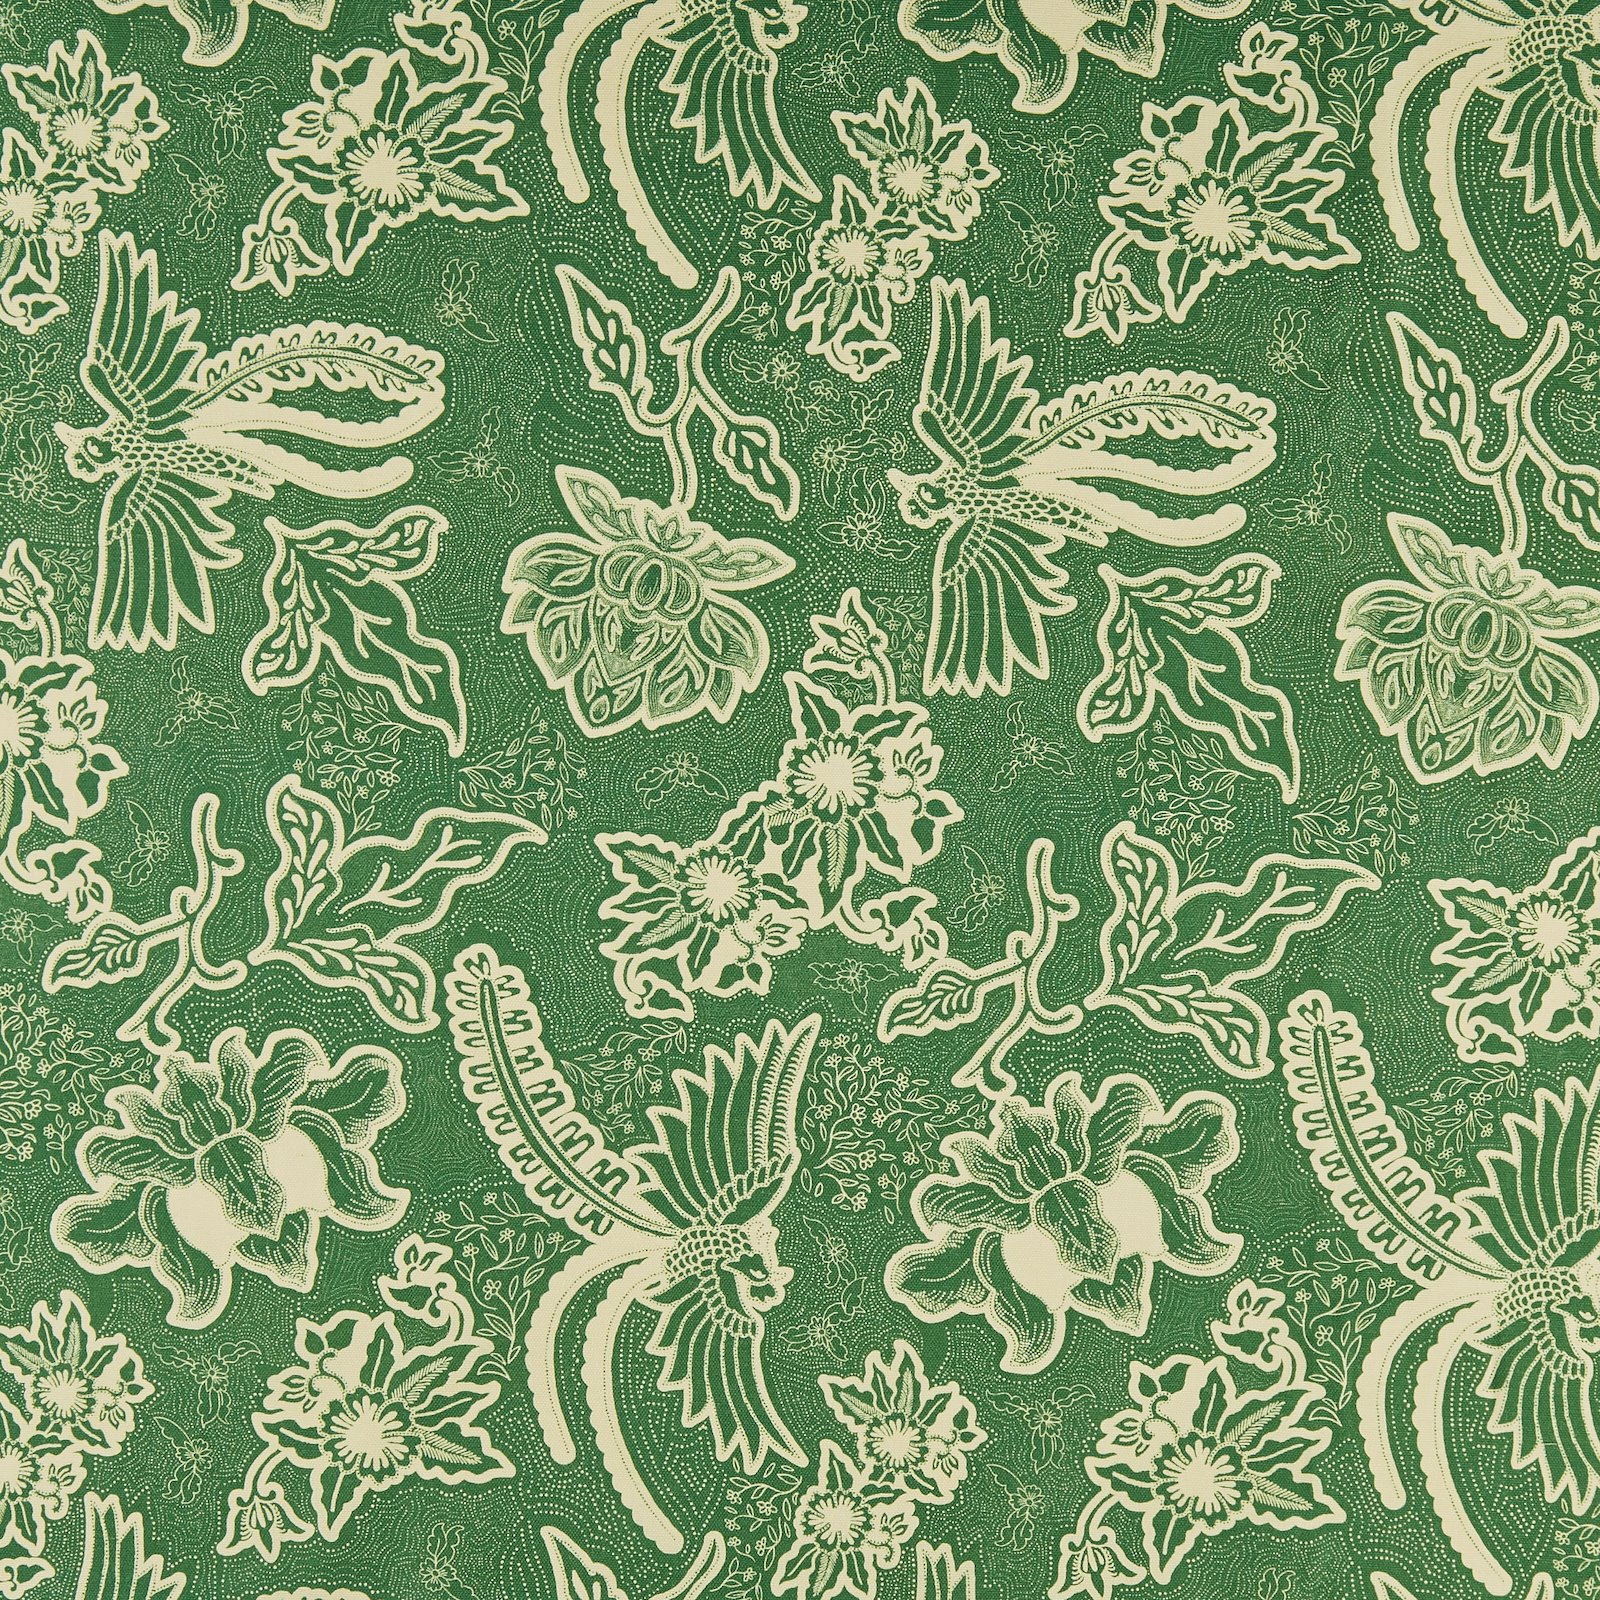 Upholstery panama green w cranes/flowers 826474_pack_lp